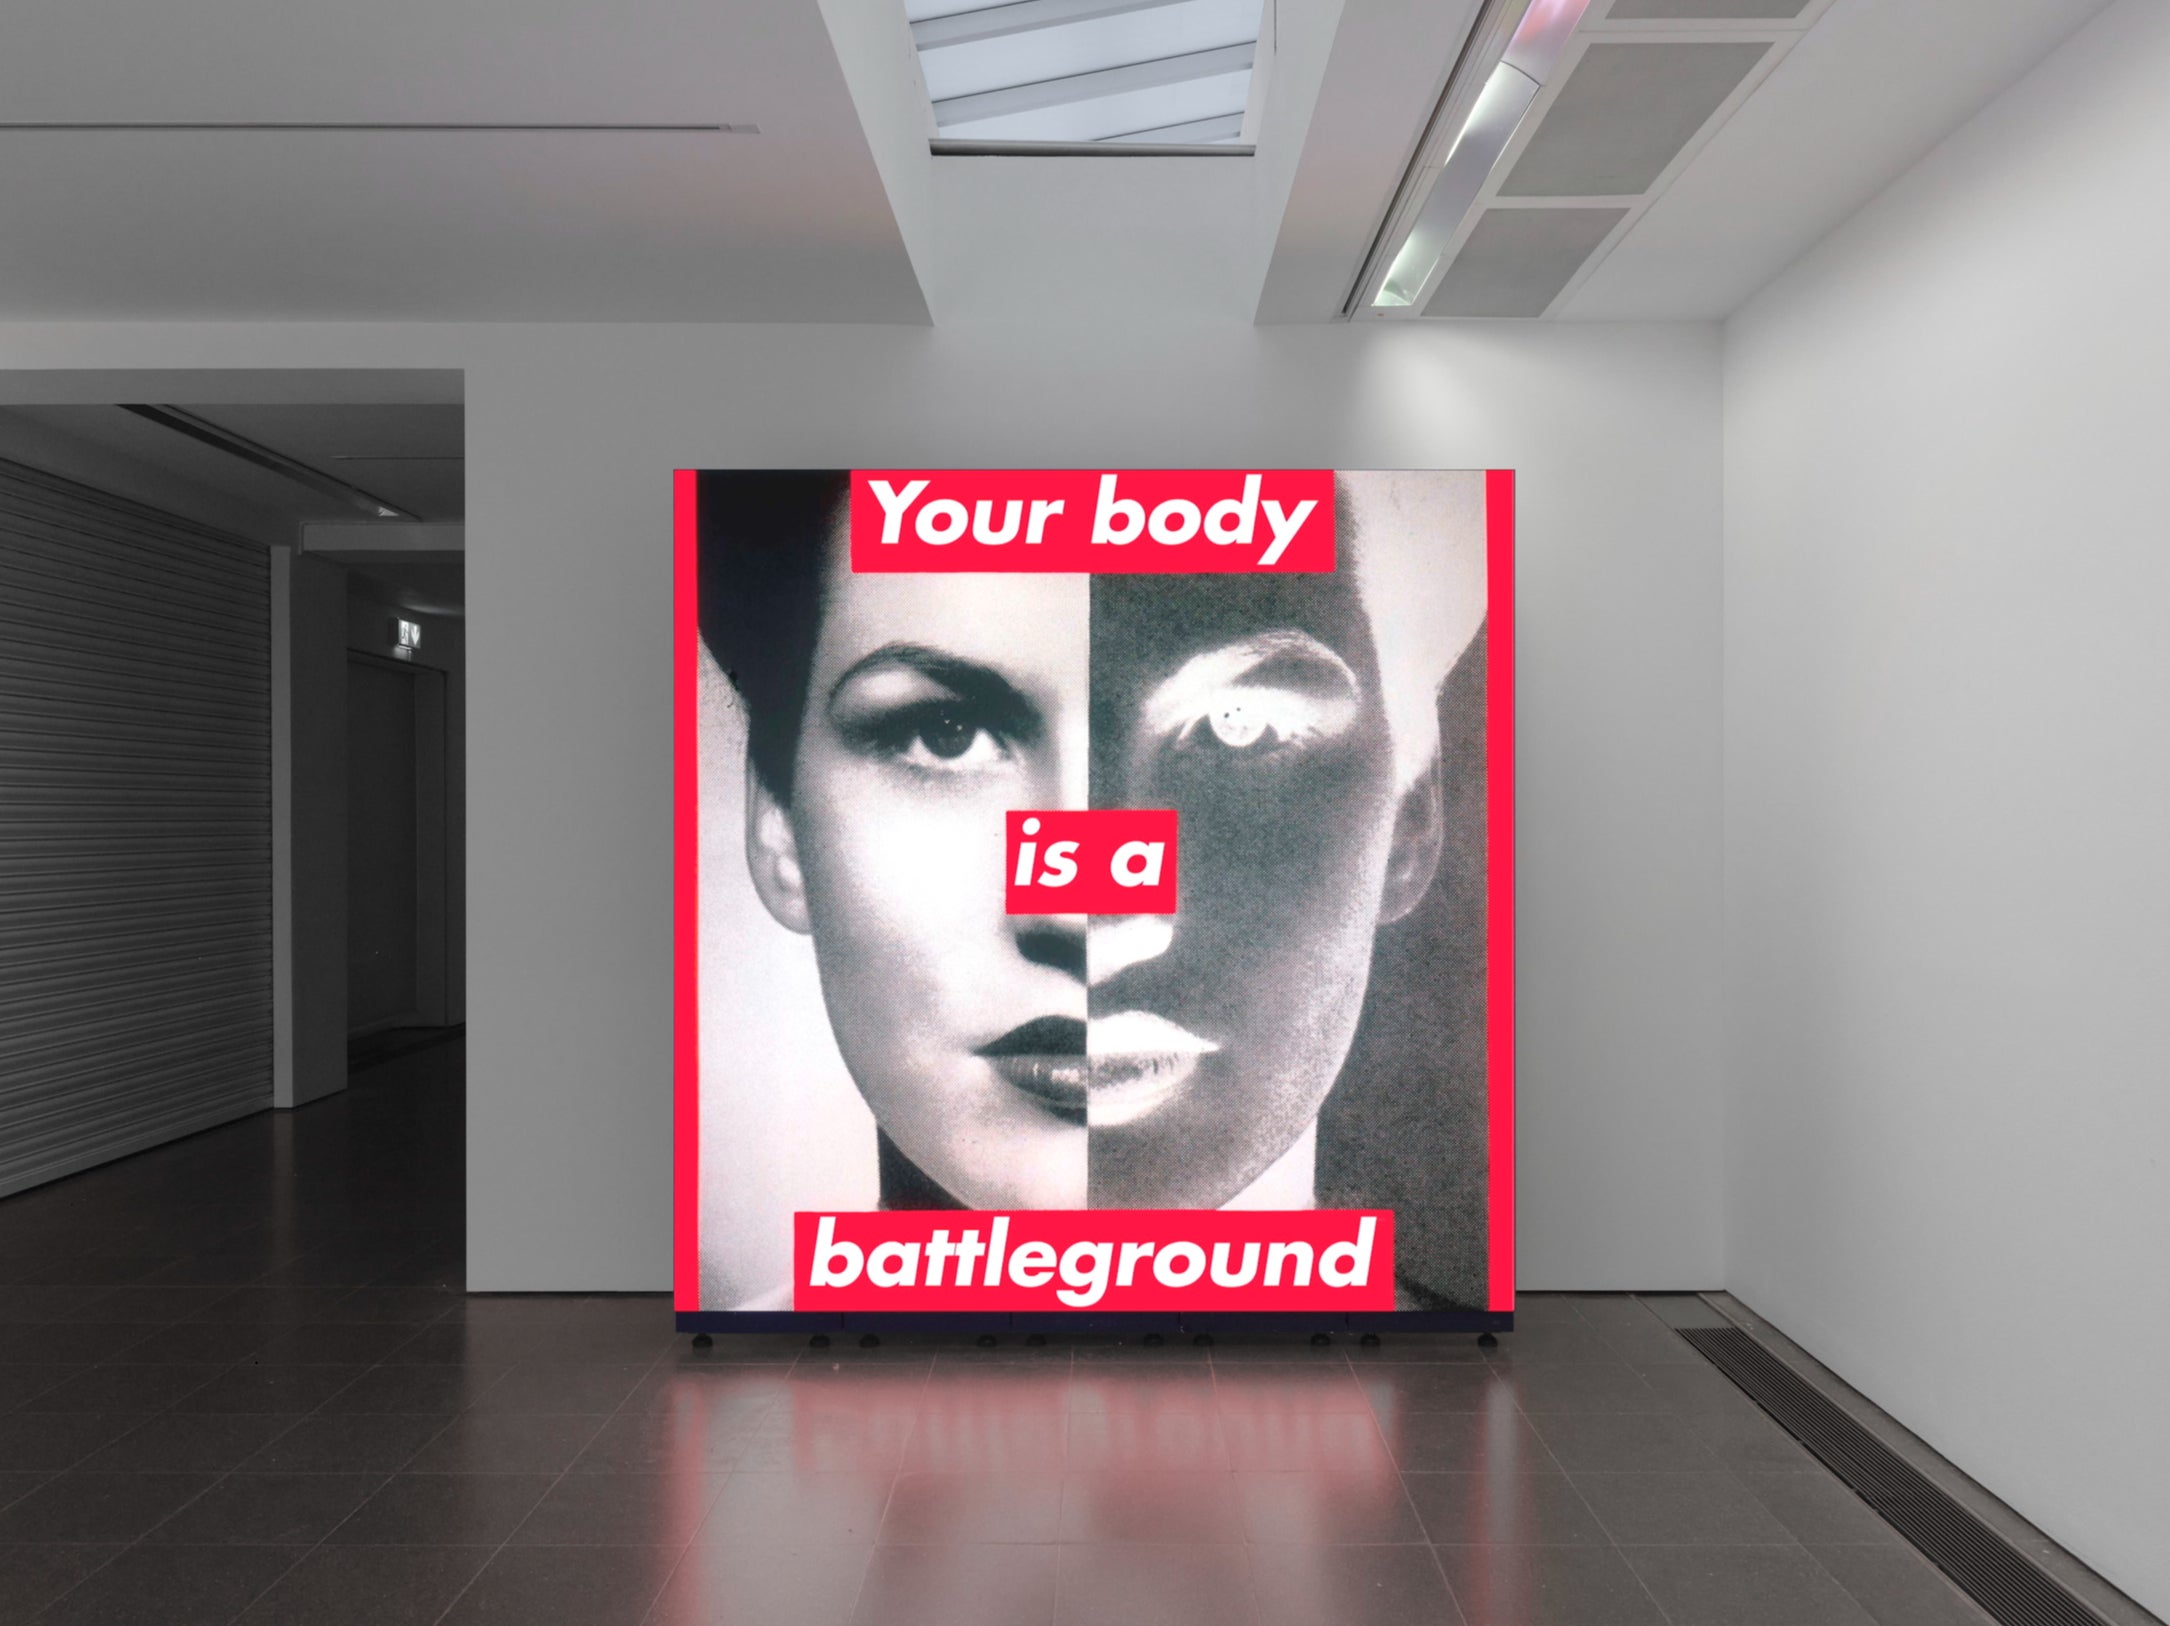 Barbara Kruger’s ‘Your Body is a Battleground’ at the Serpentine